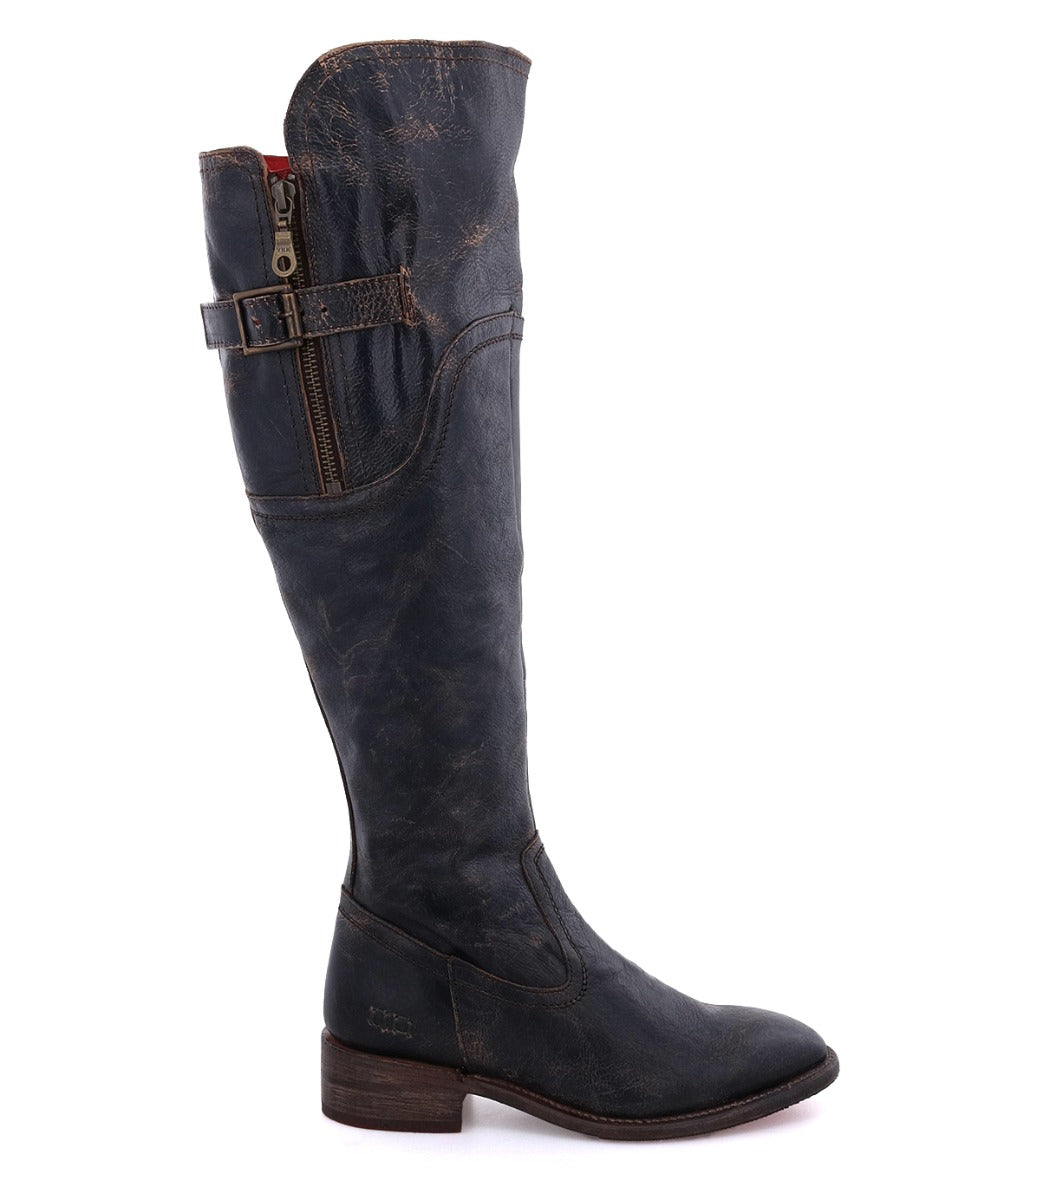 A women's Kathleen boot by Bed Stu with a zipper on the side.